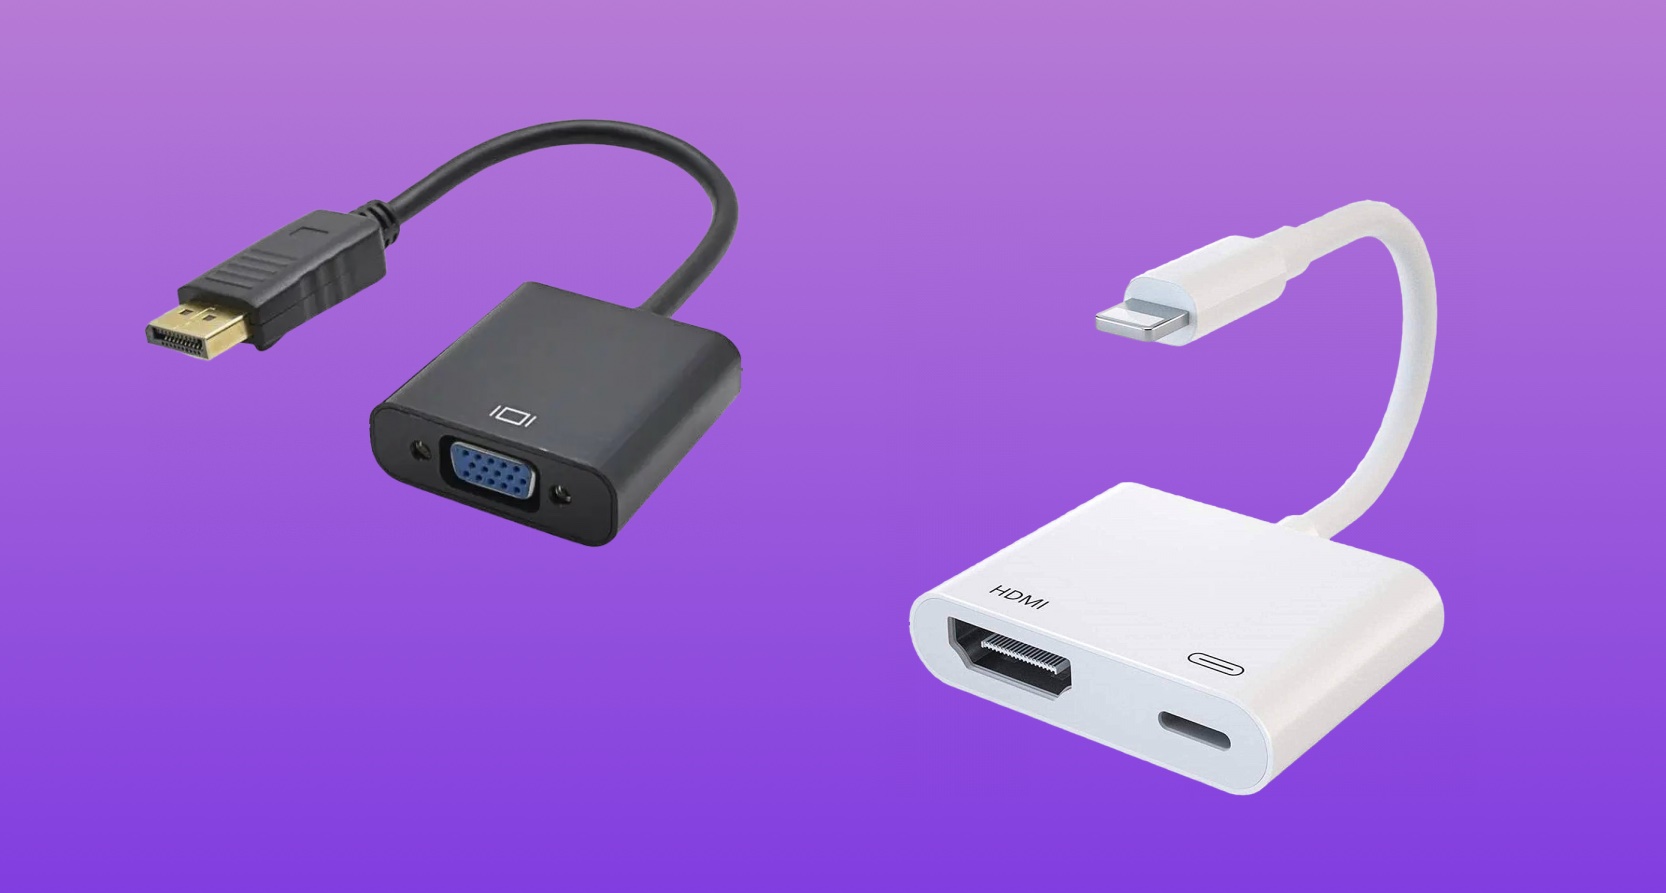 Use adapters to connect your devices